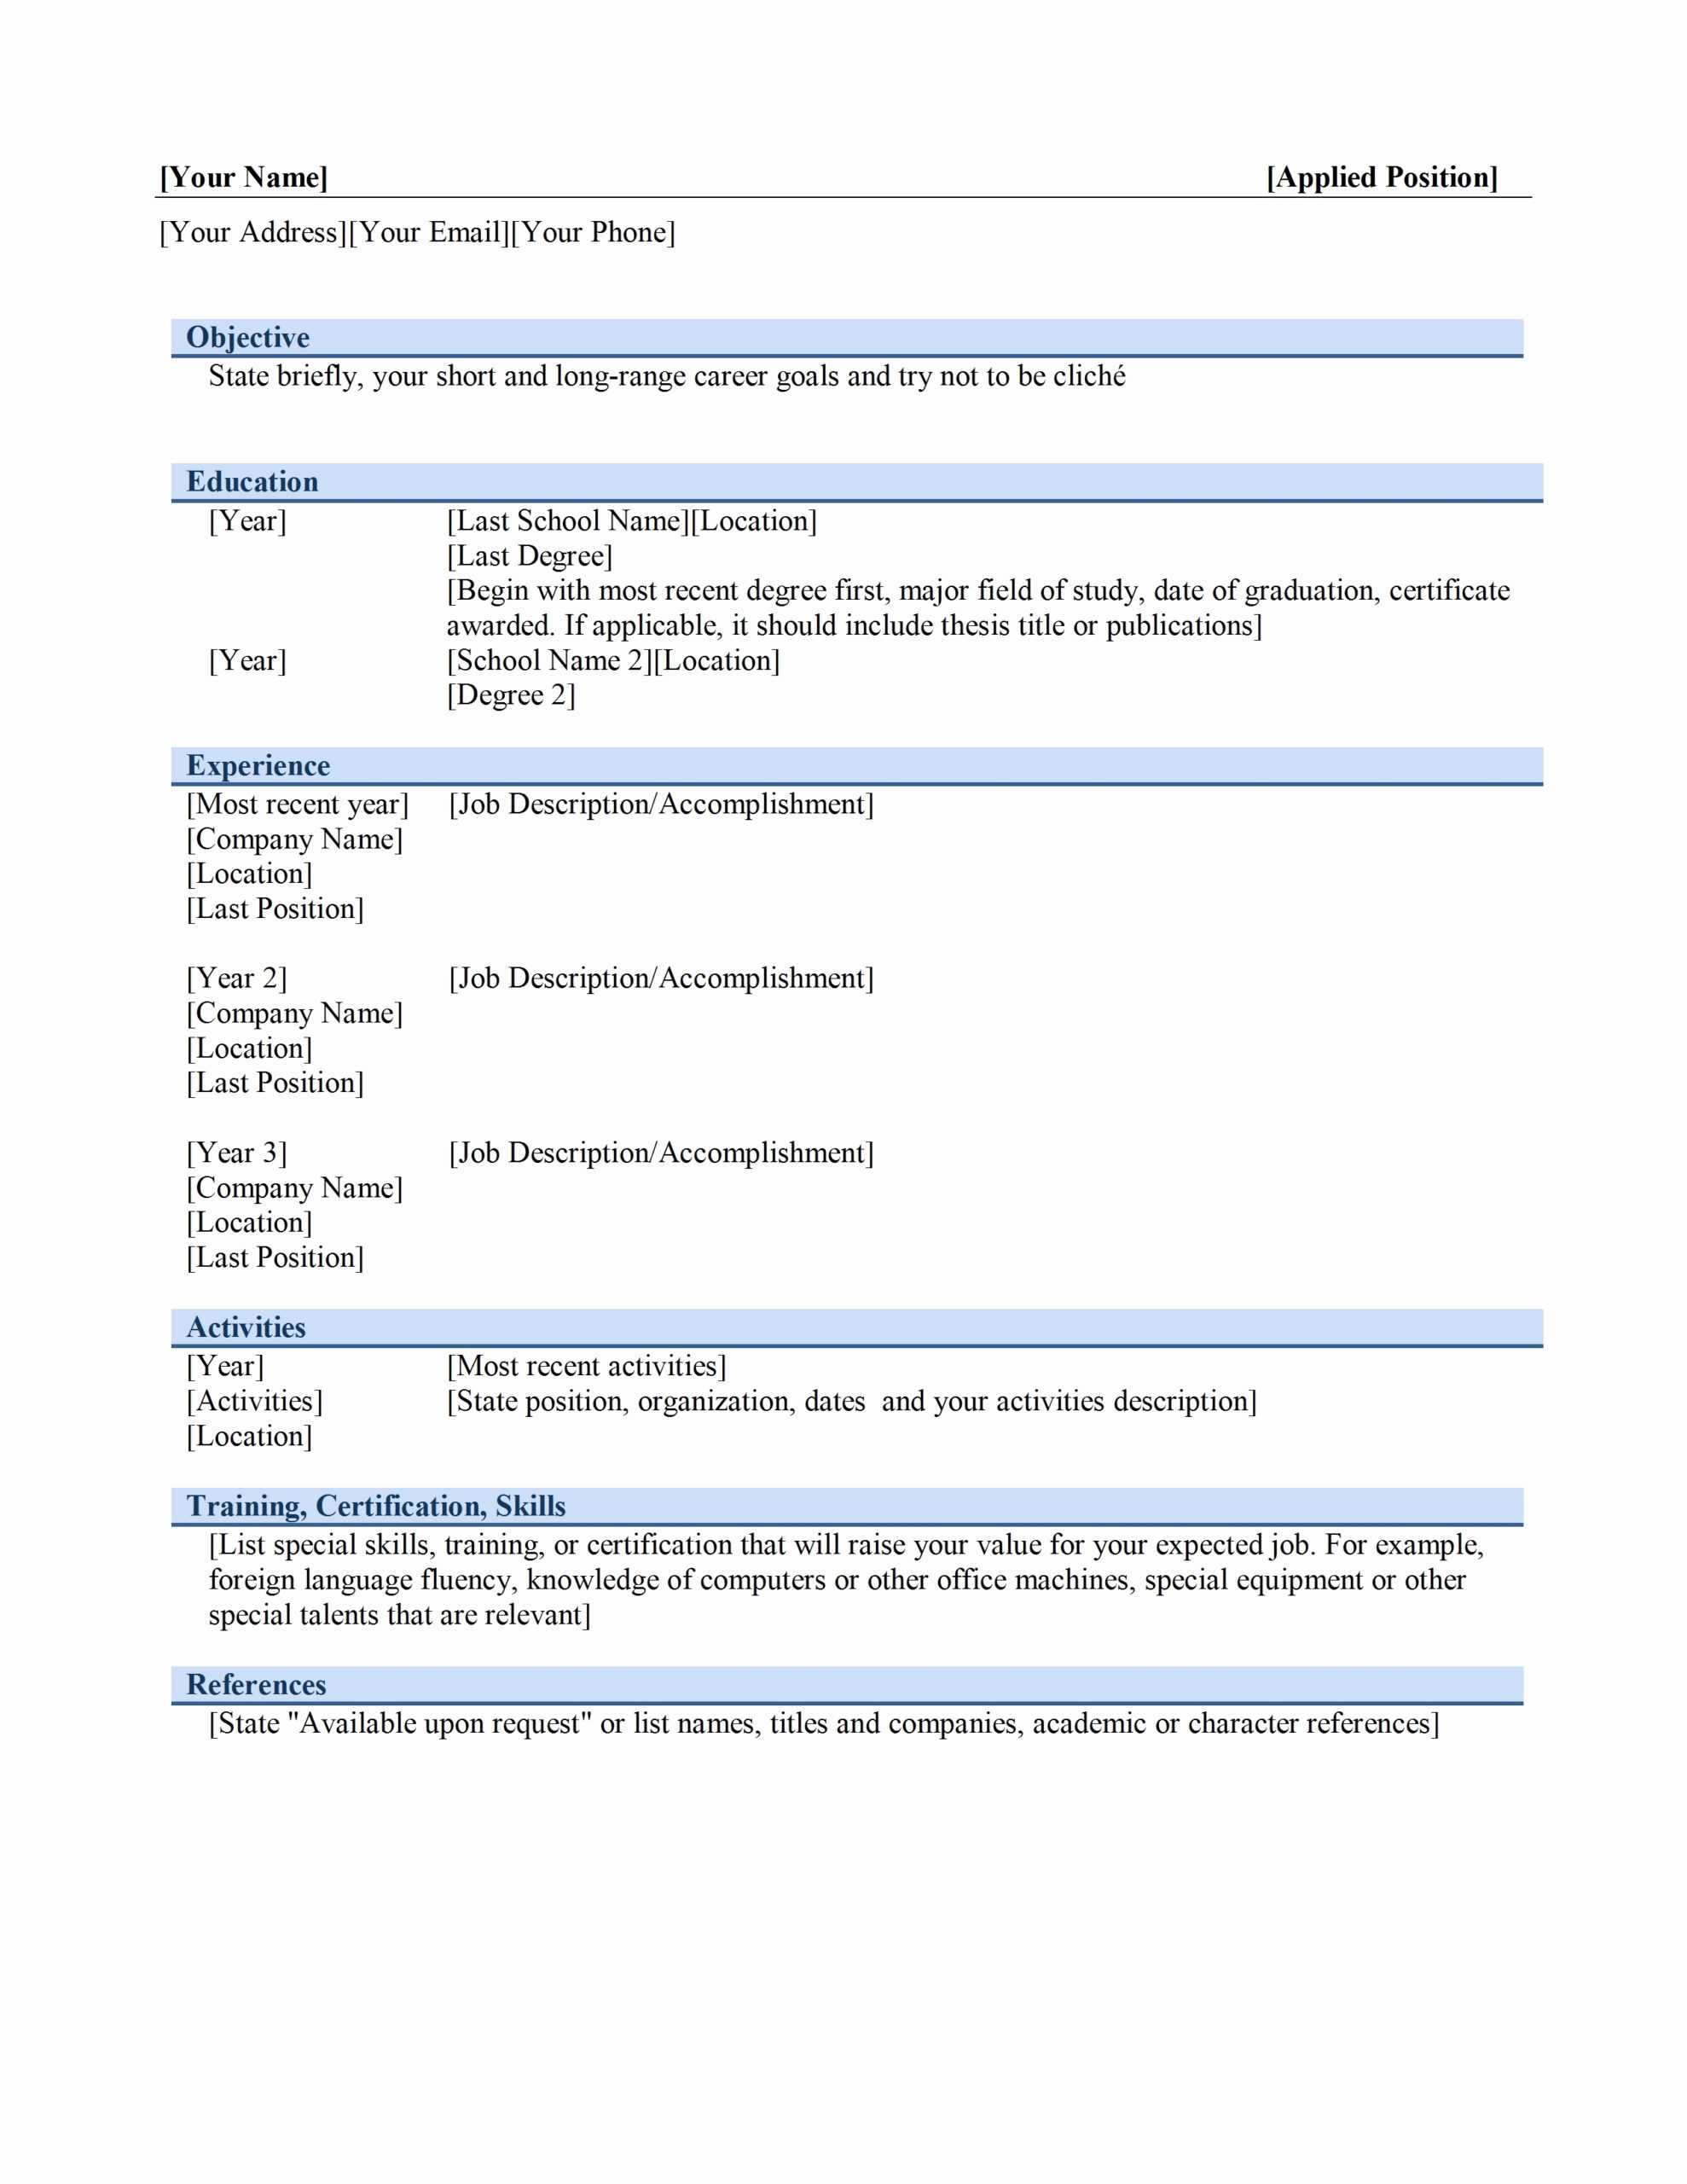 029 Chronological Resume Template Microsoft Word Tjfs Intended For Free Basic Resume Templates Microsoft Word